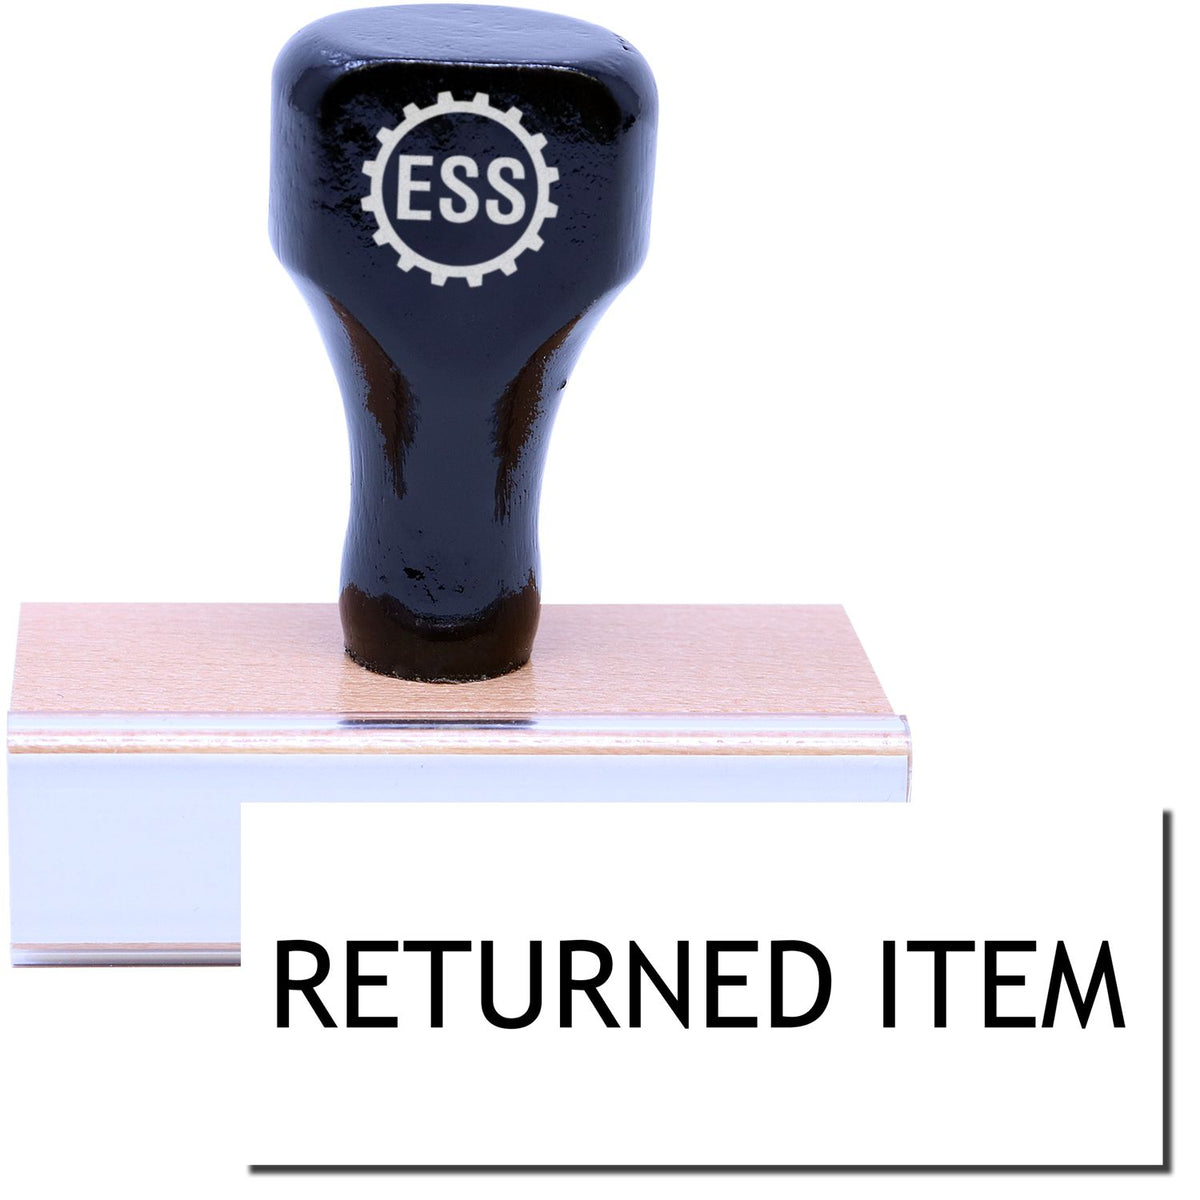 A stock office rubber stamp with a stamped image showing how the text &quot;RETURNED ITEM&quot; is displayed after stamping.